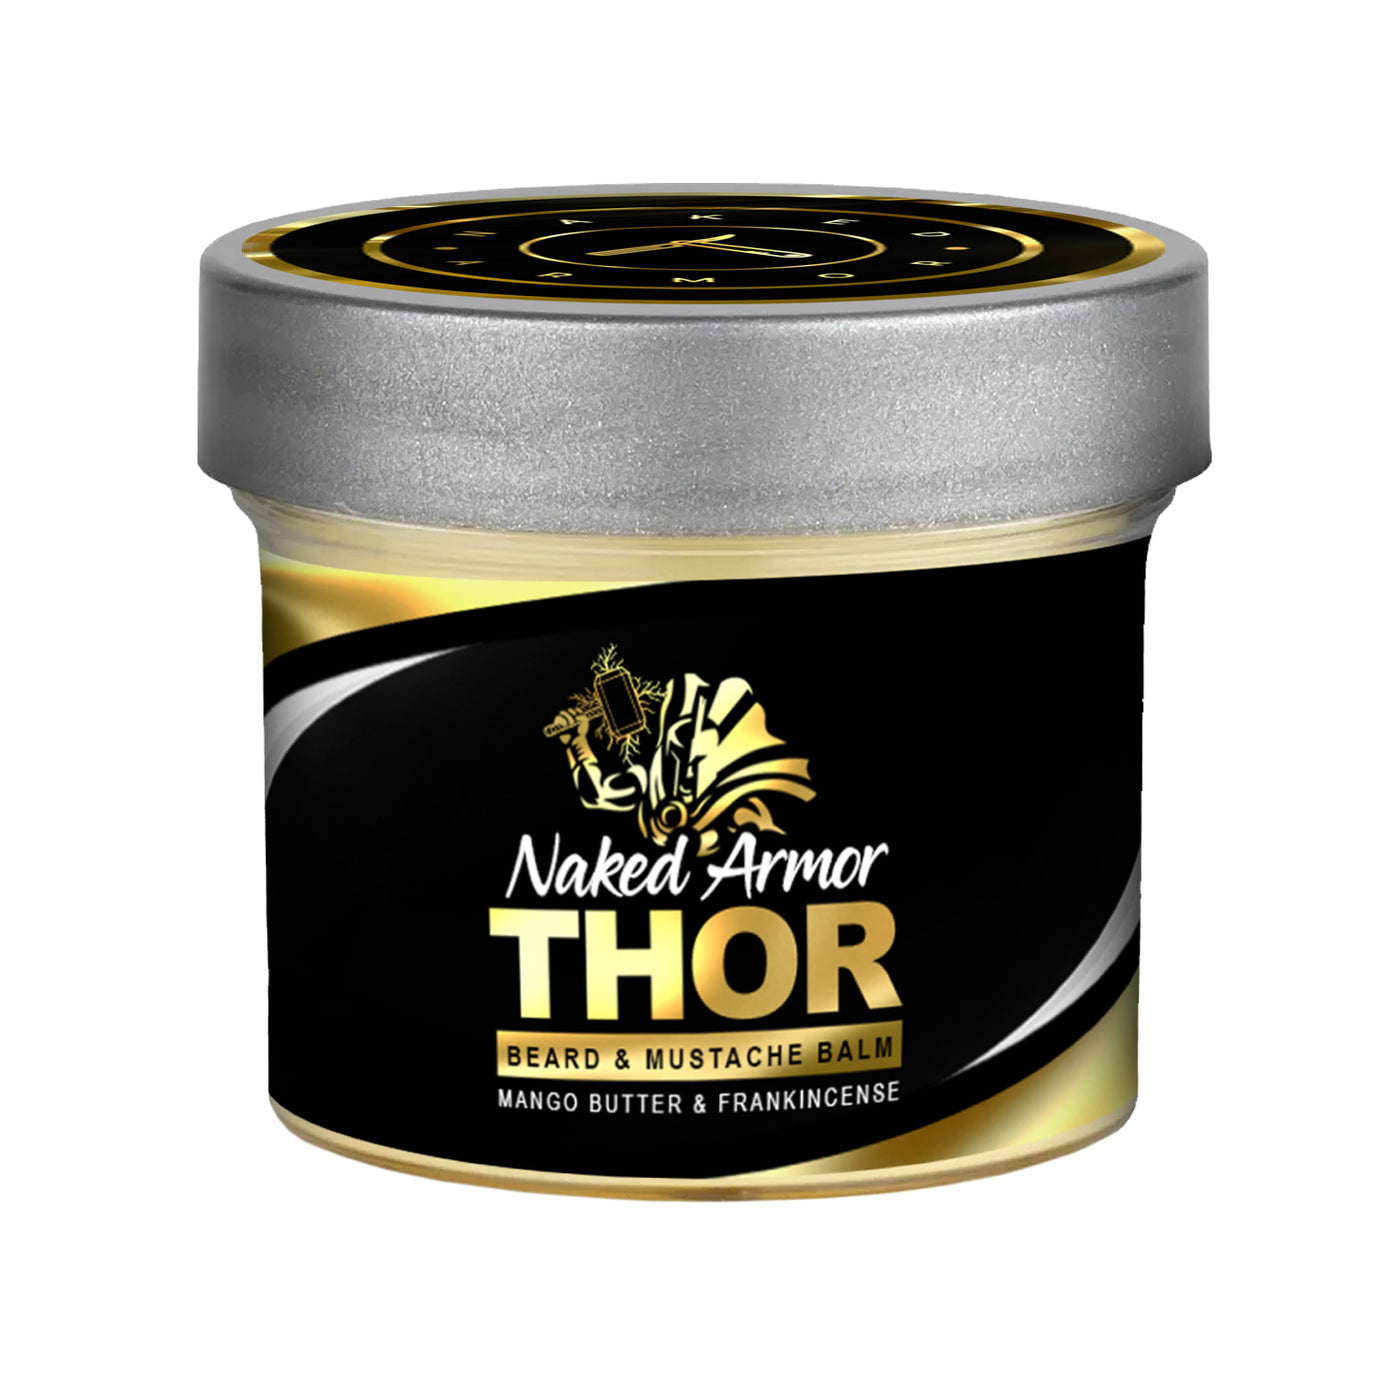  Thor Beard and Mustache Balm by Naked Armor sold by Naked Armor Razors